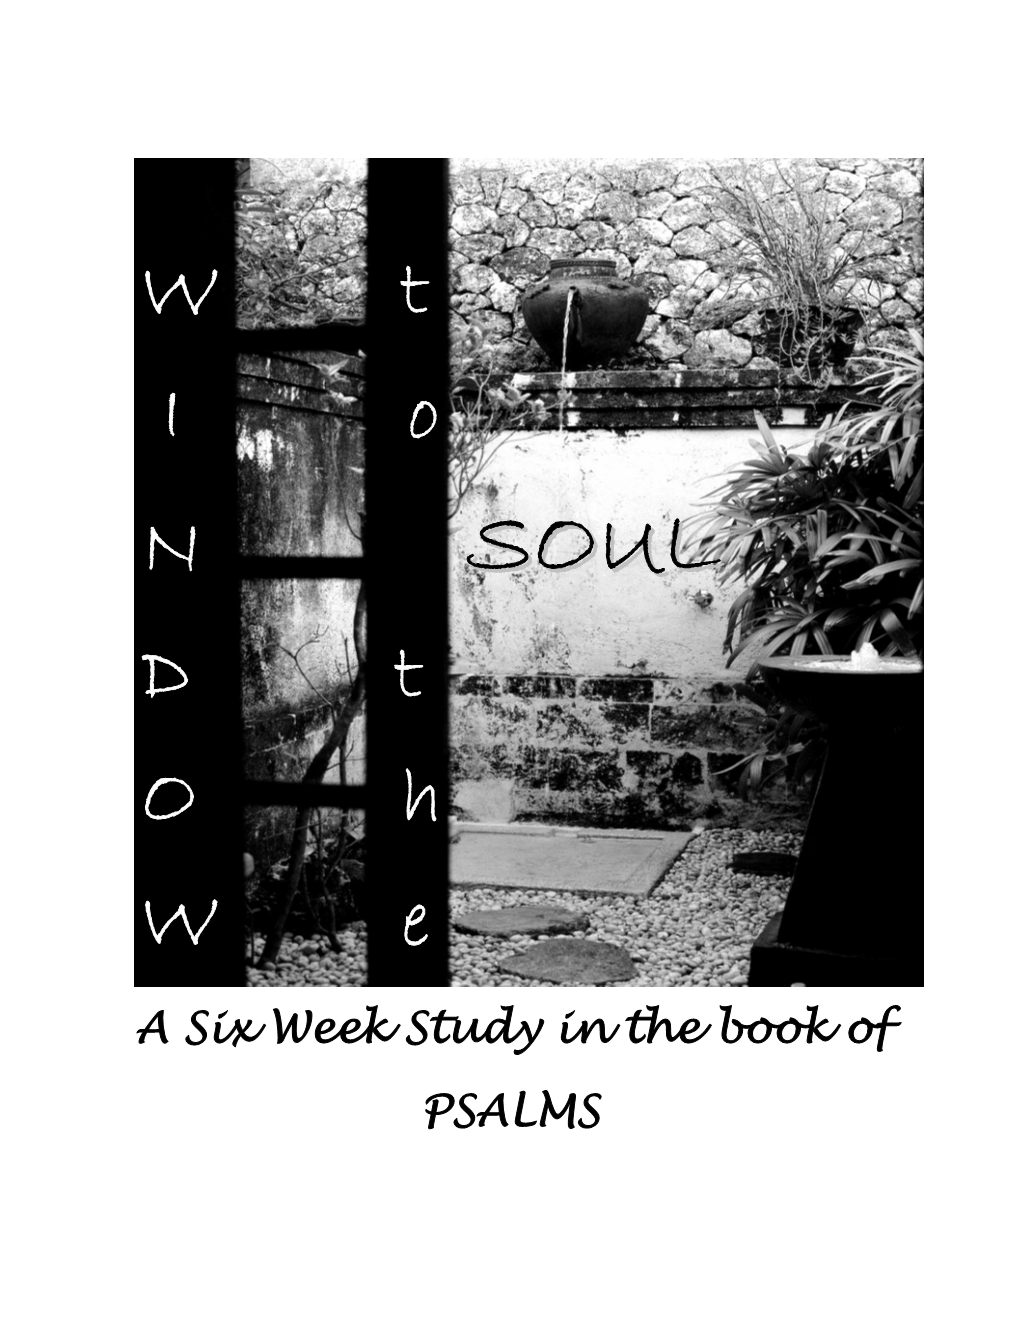 A Six Week Study in the Book of PSALMS Window to the Soul: a Six Week Study in the Book of Psalms